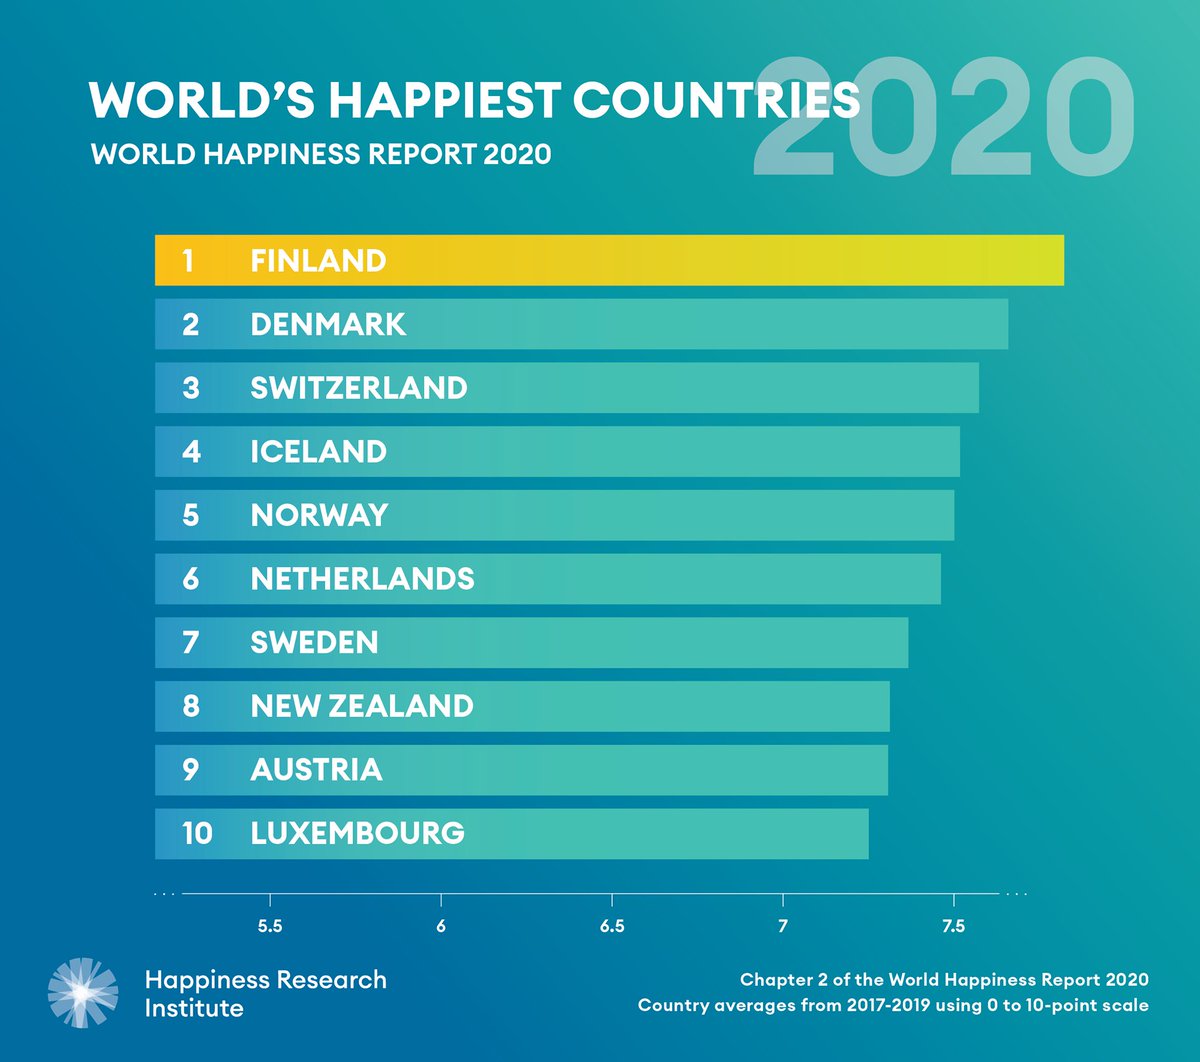 Nordic Co-operation on Twitter: "Congratulations #Finland! 🇫🇮😀 Do you some happy news? For the third consecutive year Finland is the happiest country the world! Also, all Nordic countries are in